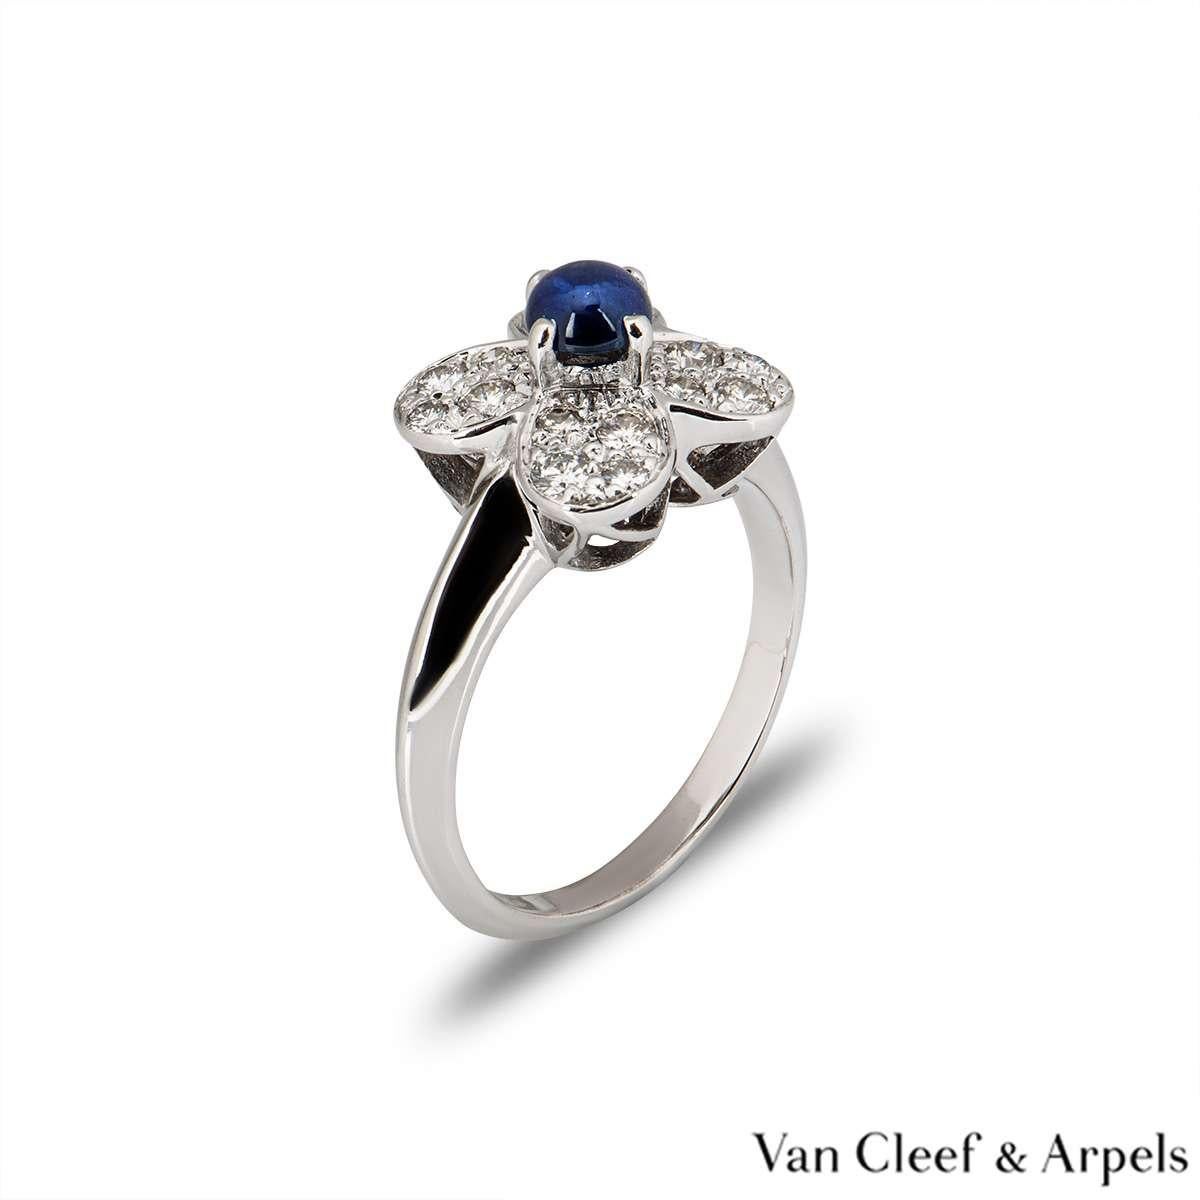 A beautiful 18k white gold Van Cleef & Arpels diamond ring from the Alhambra collection. The central flower motif is set with a single claw set blue cabochon cut sapphire. The surrounding petals of the flower are pave set with round brilliant cut